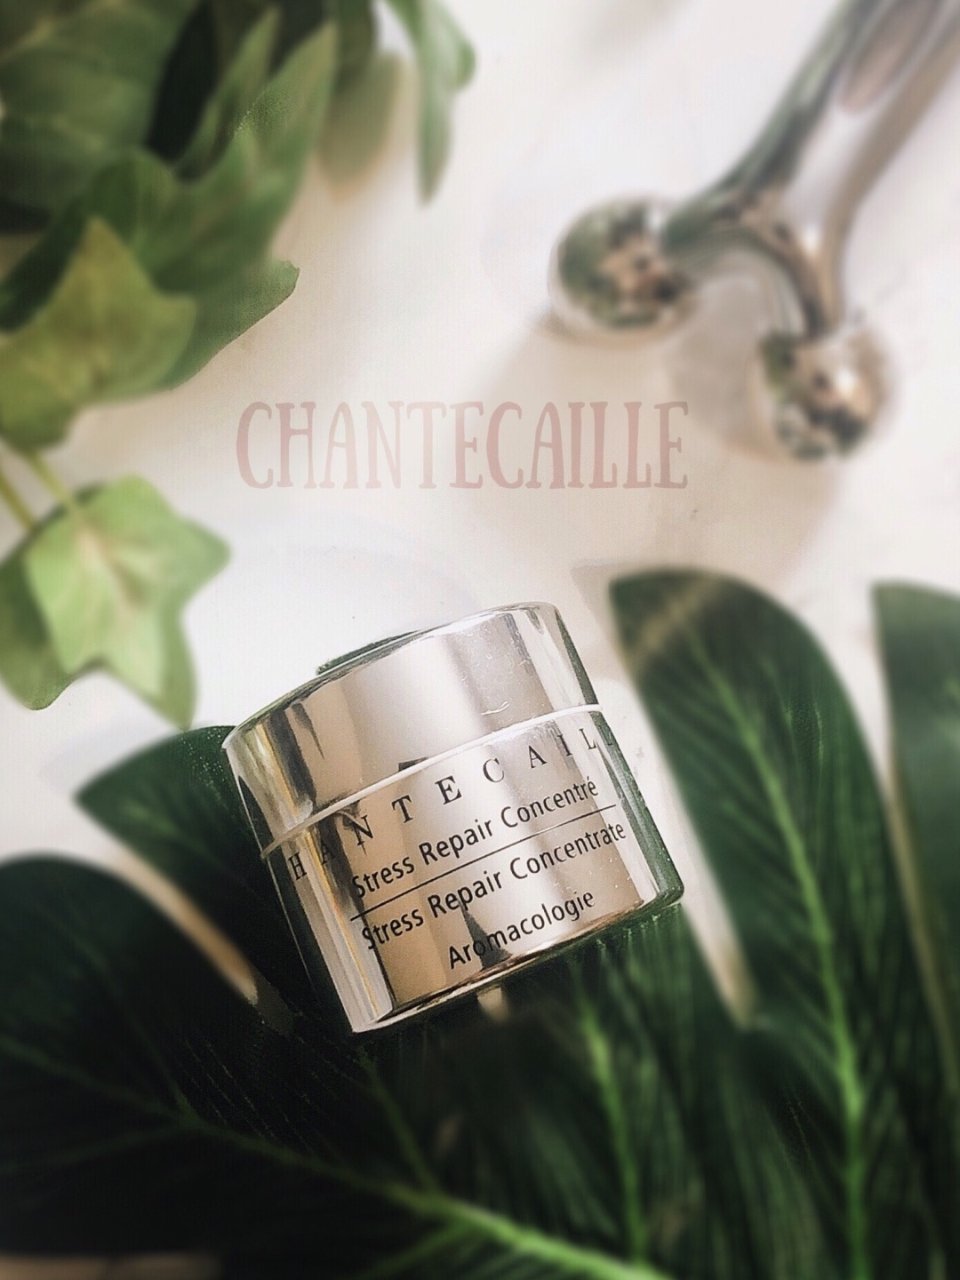 Chantecaille 香缇卡,stress repair concentrate